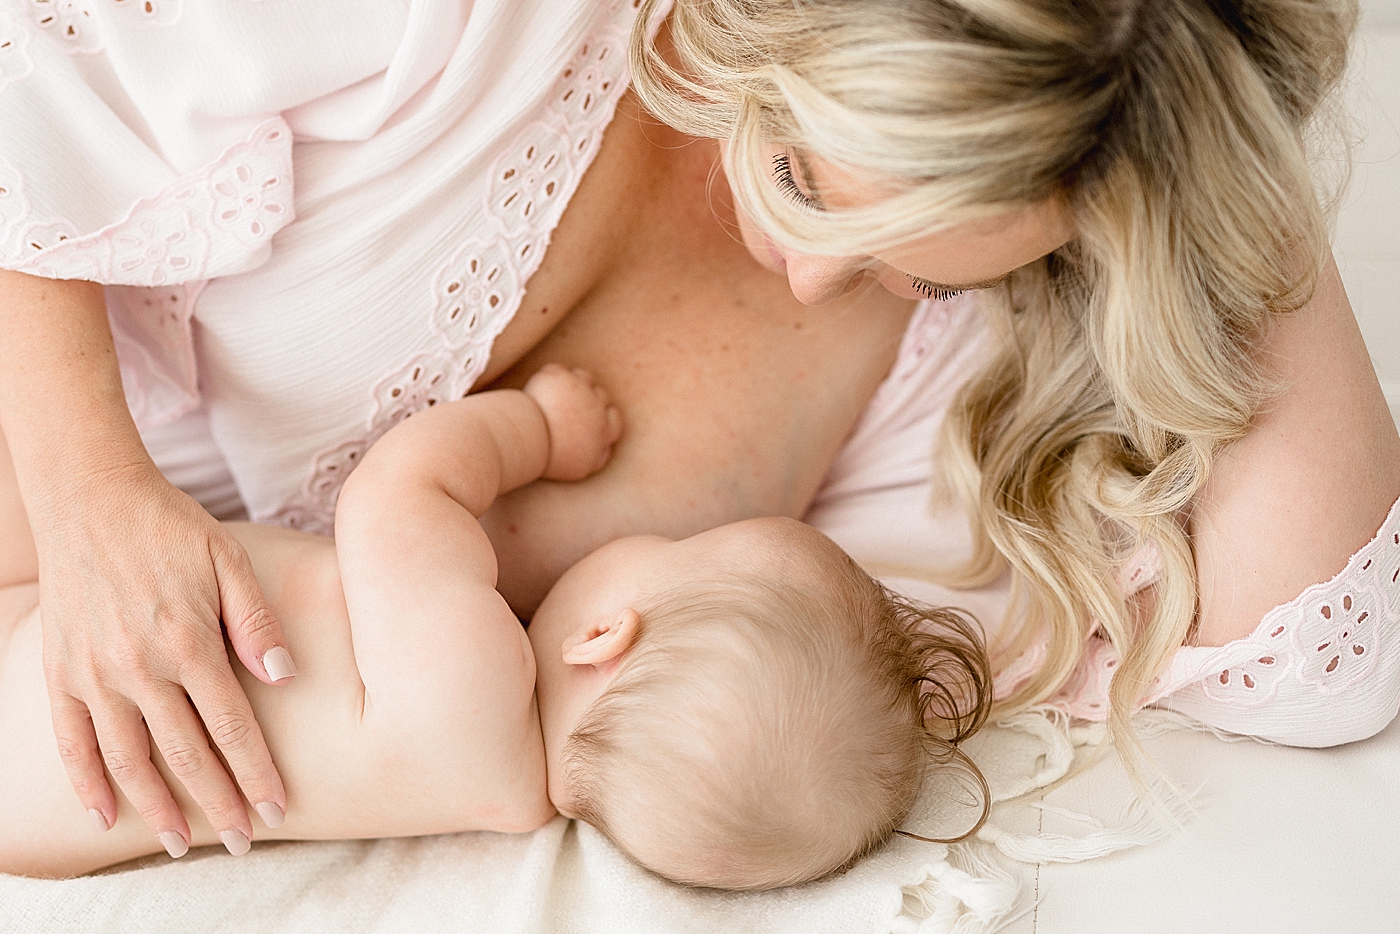 Mom laying down breastfeeding her baby. Photo by Brittany Elise Photography.